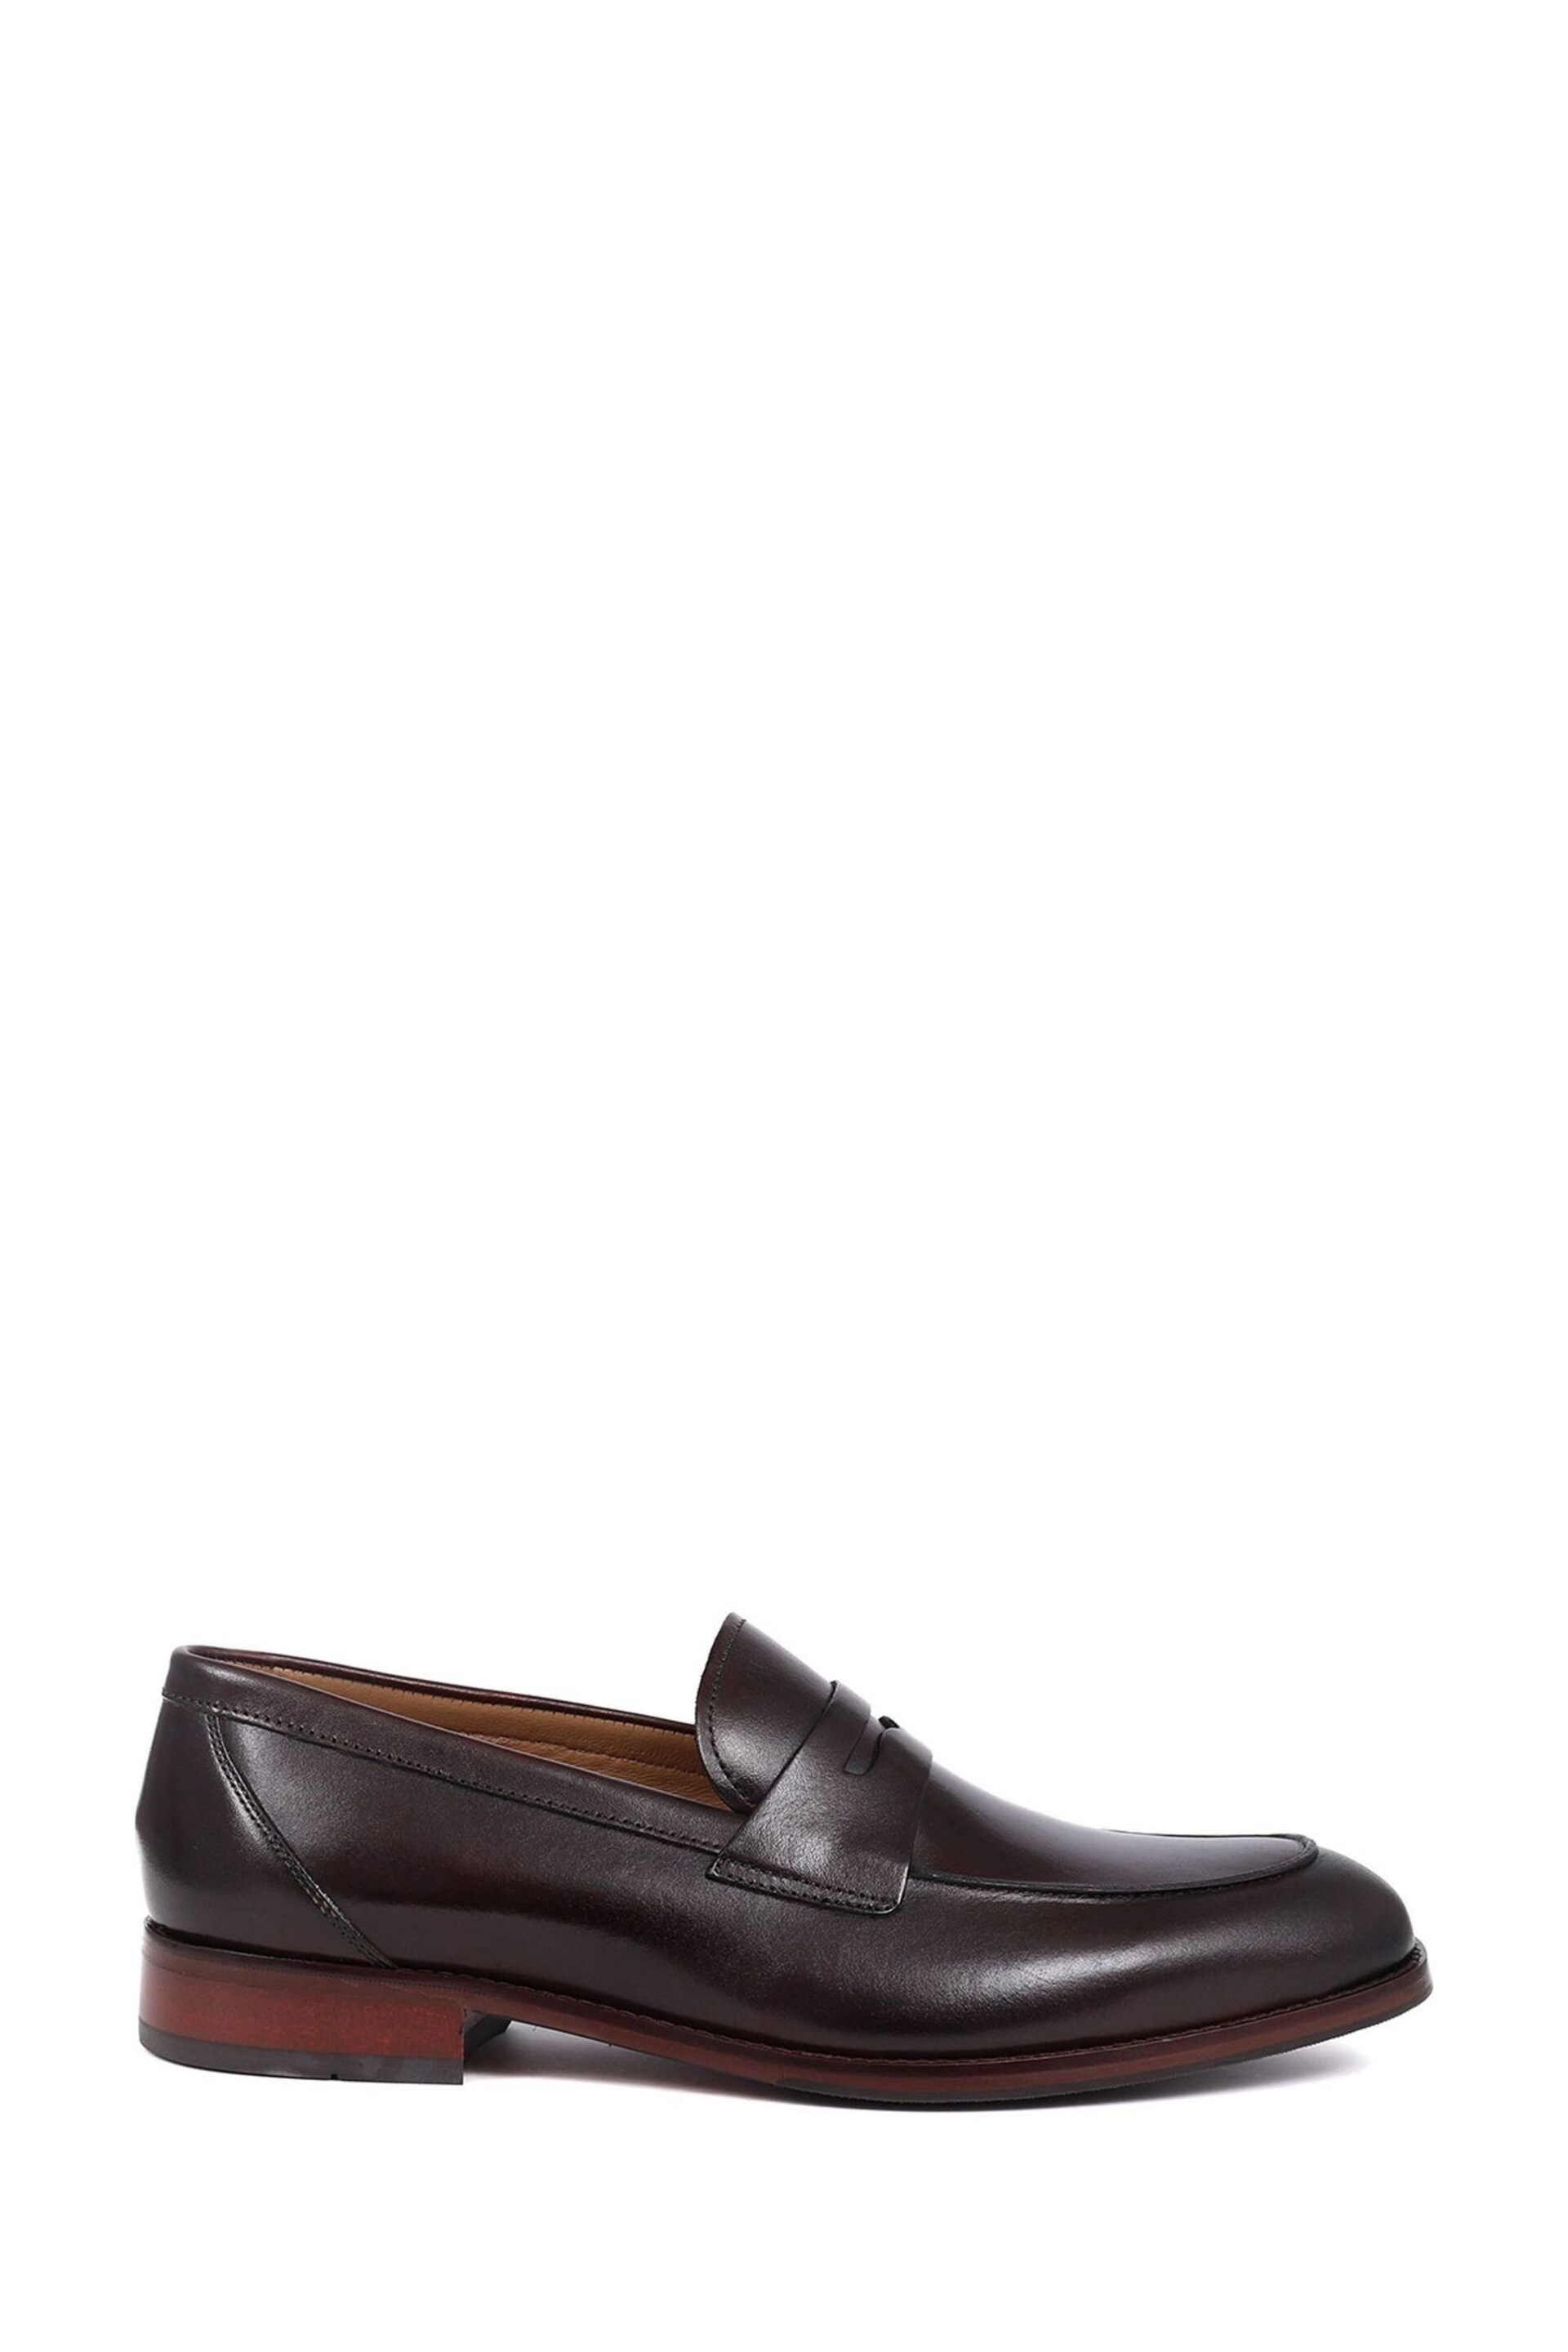 Jones Bootmaker Leather Penny Loafers - Image 2 of 5